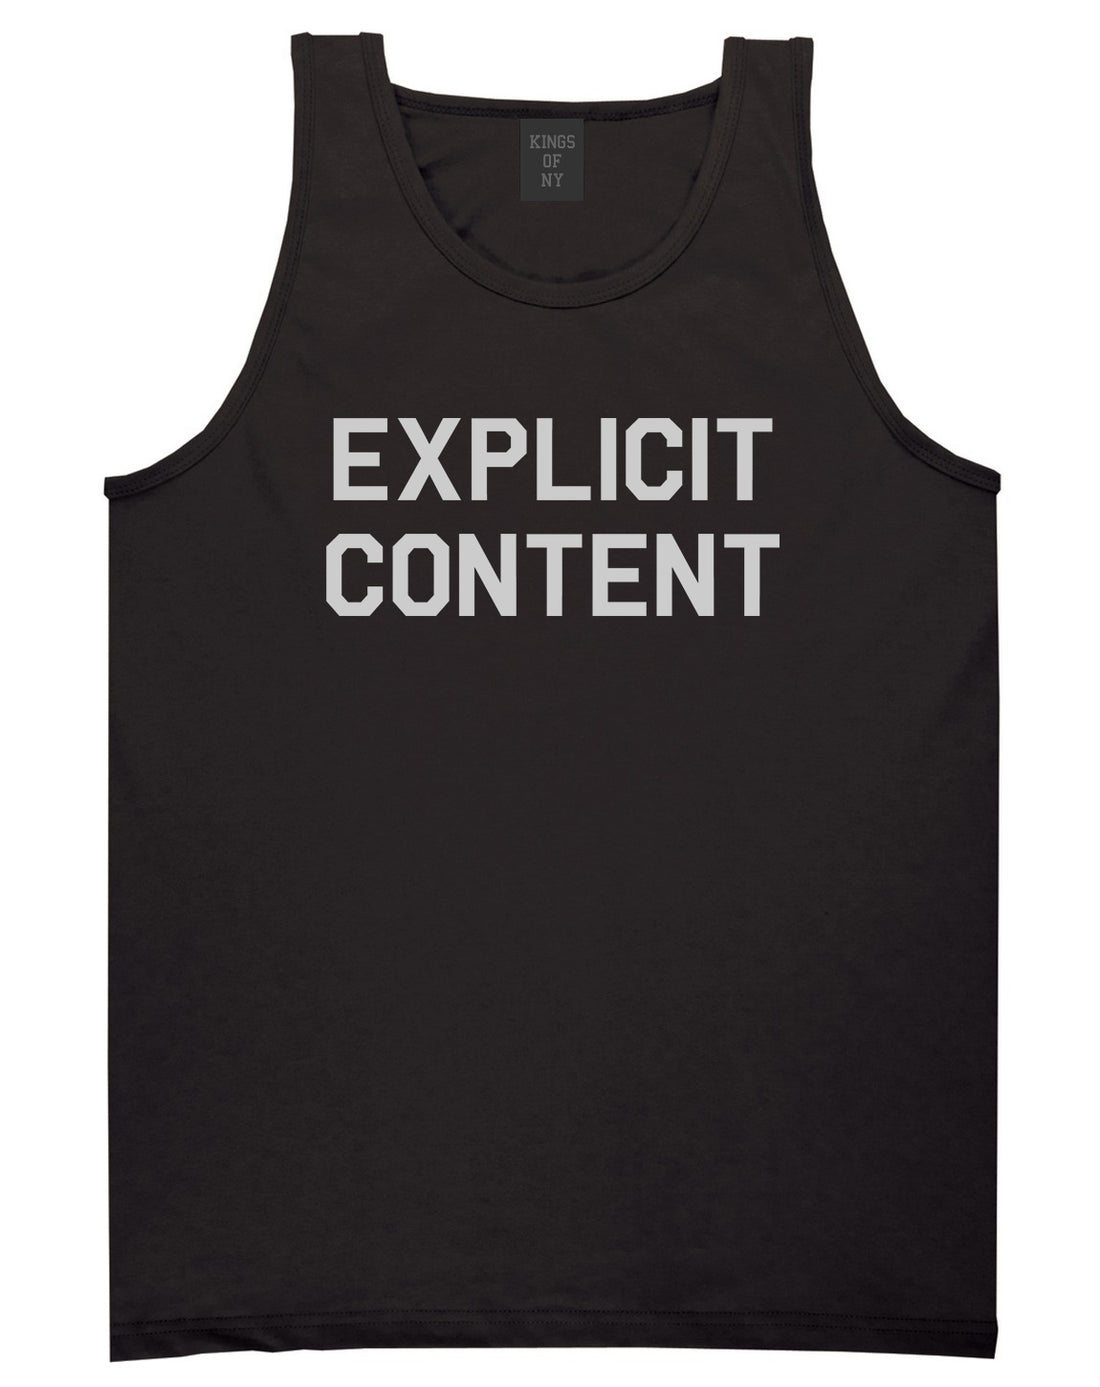 Explicit_Content Mens Black Tank Top Shirt by Kings Of NY